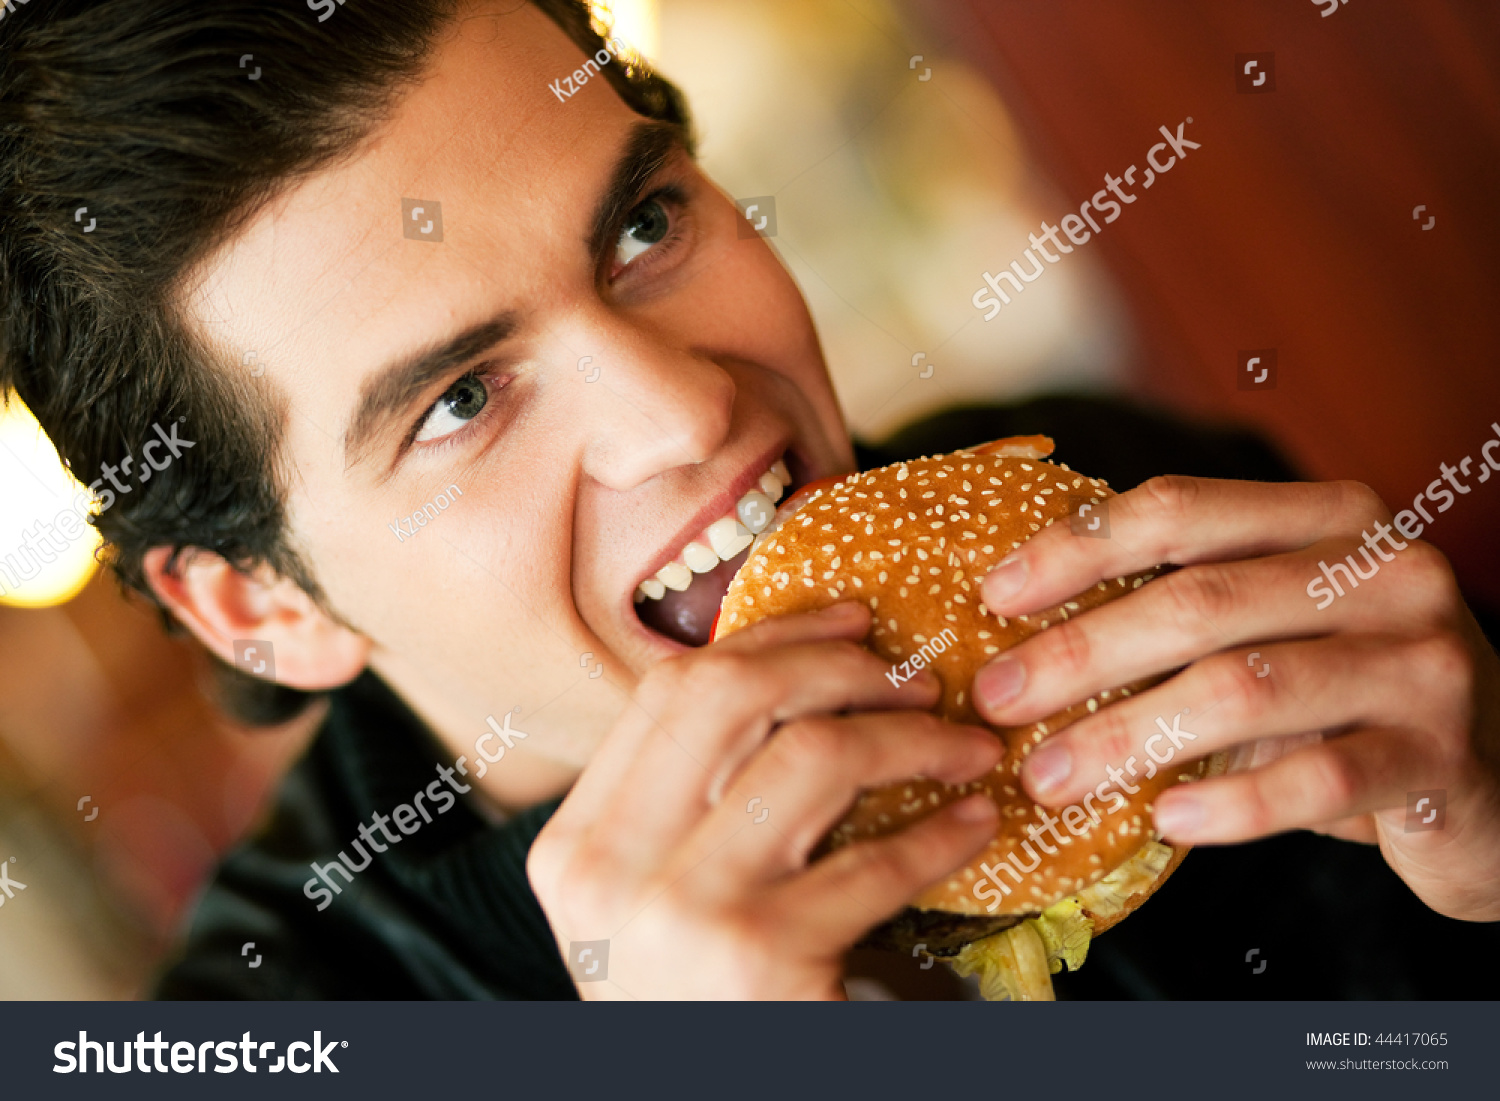 Man In A Restaurant Or Diner Eating A Hamburger He Is Hungry And